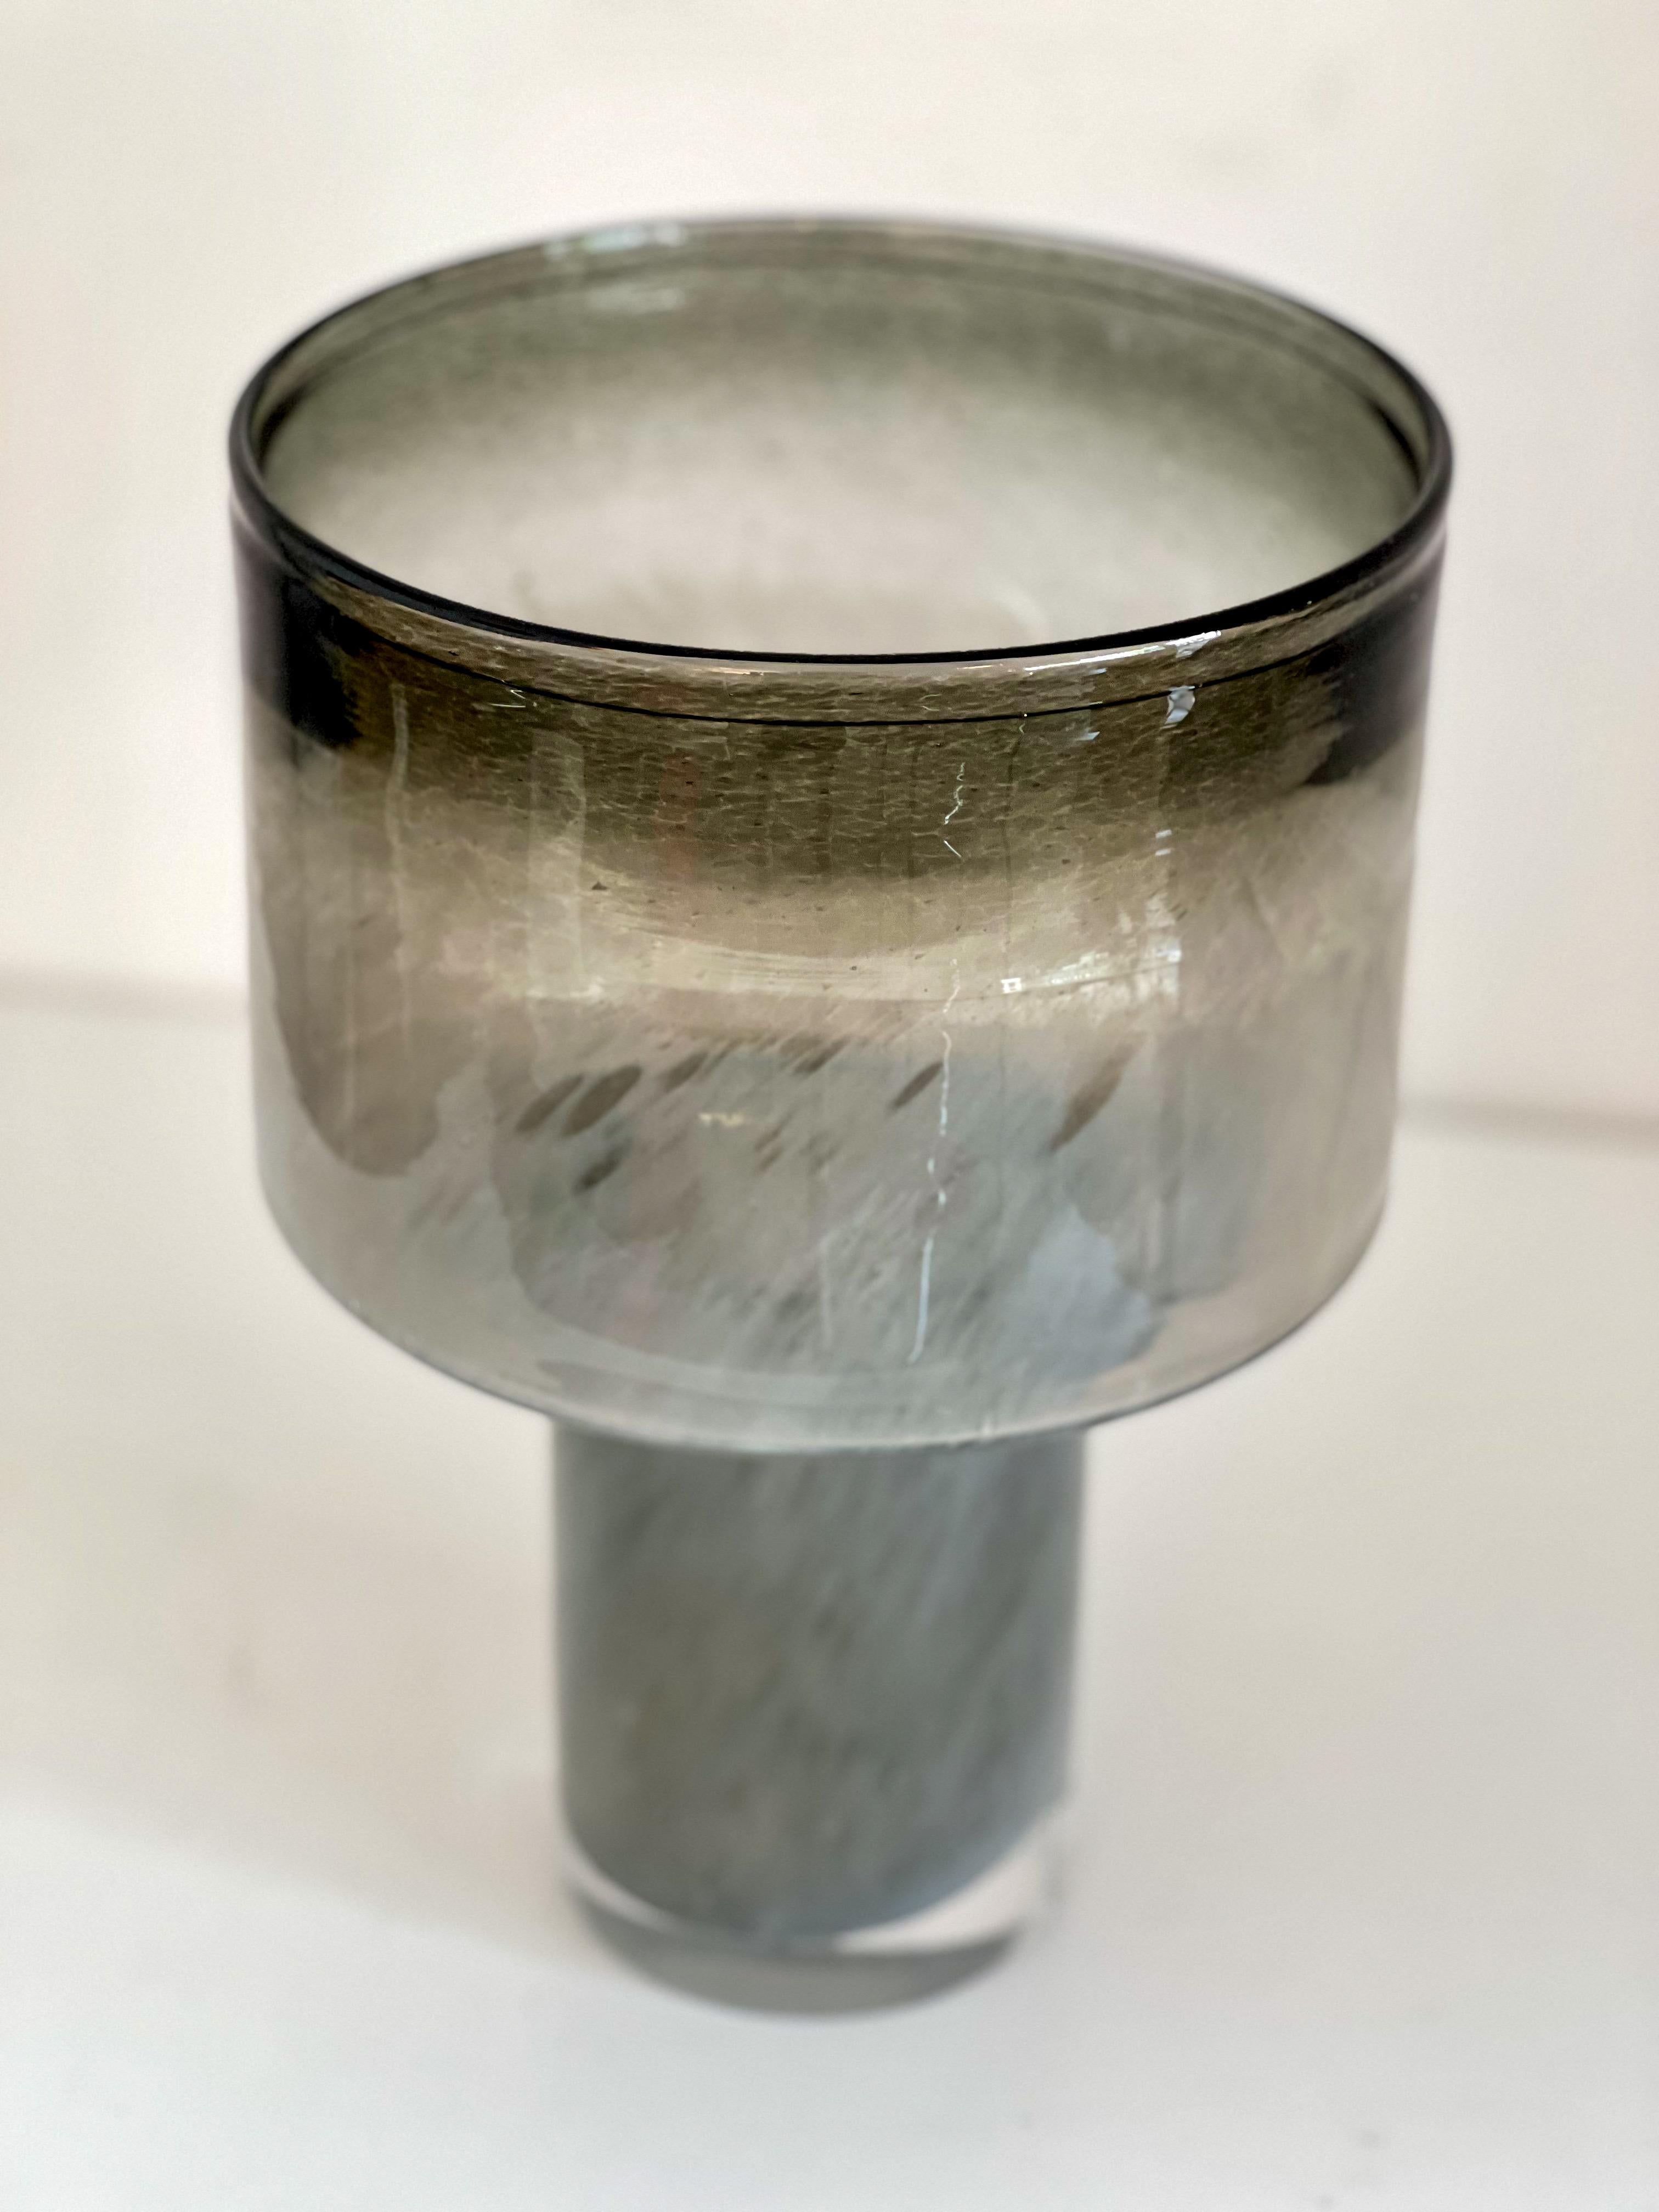 Chic cylinder vase 'on base' in beautiful smoked gray color.
Heavy glass
Graduation in colours - black, smoke, grey, white - all in one, creating a special effect. 
Semi transparent 
Designer, fabrication unknown 